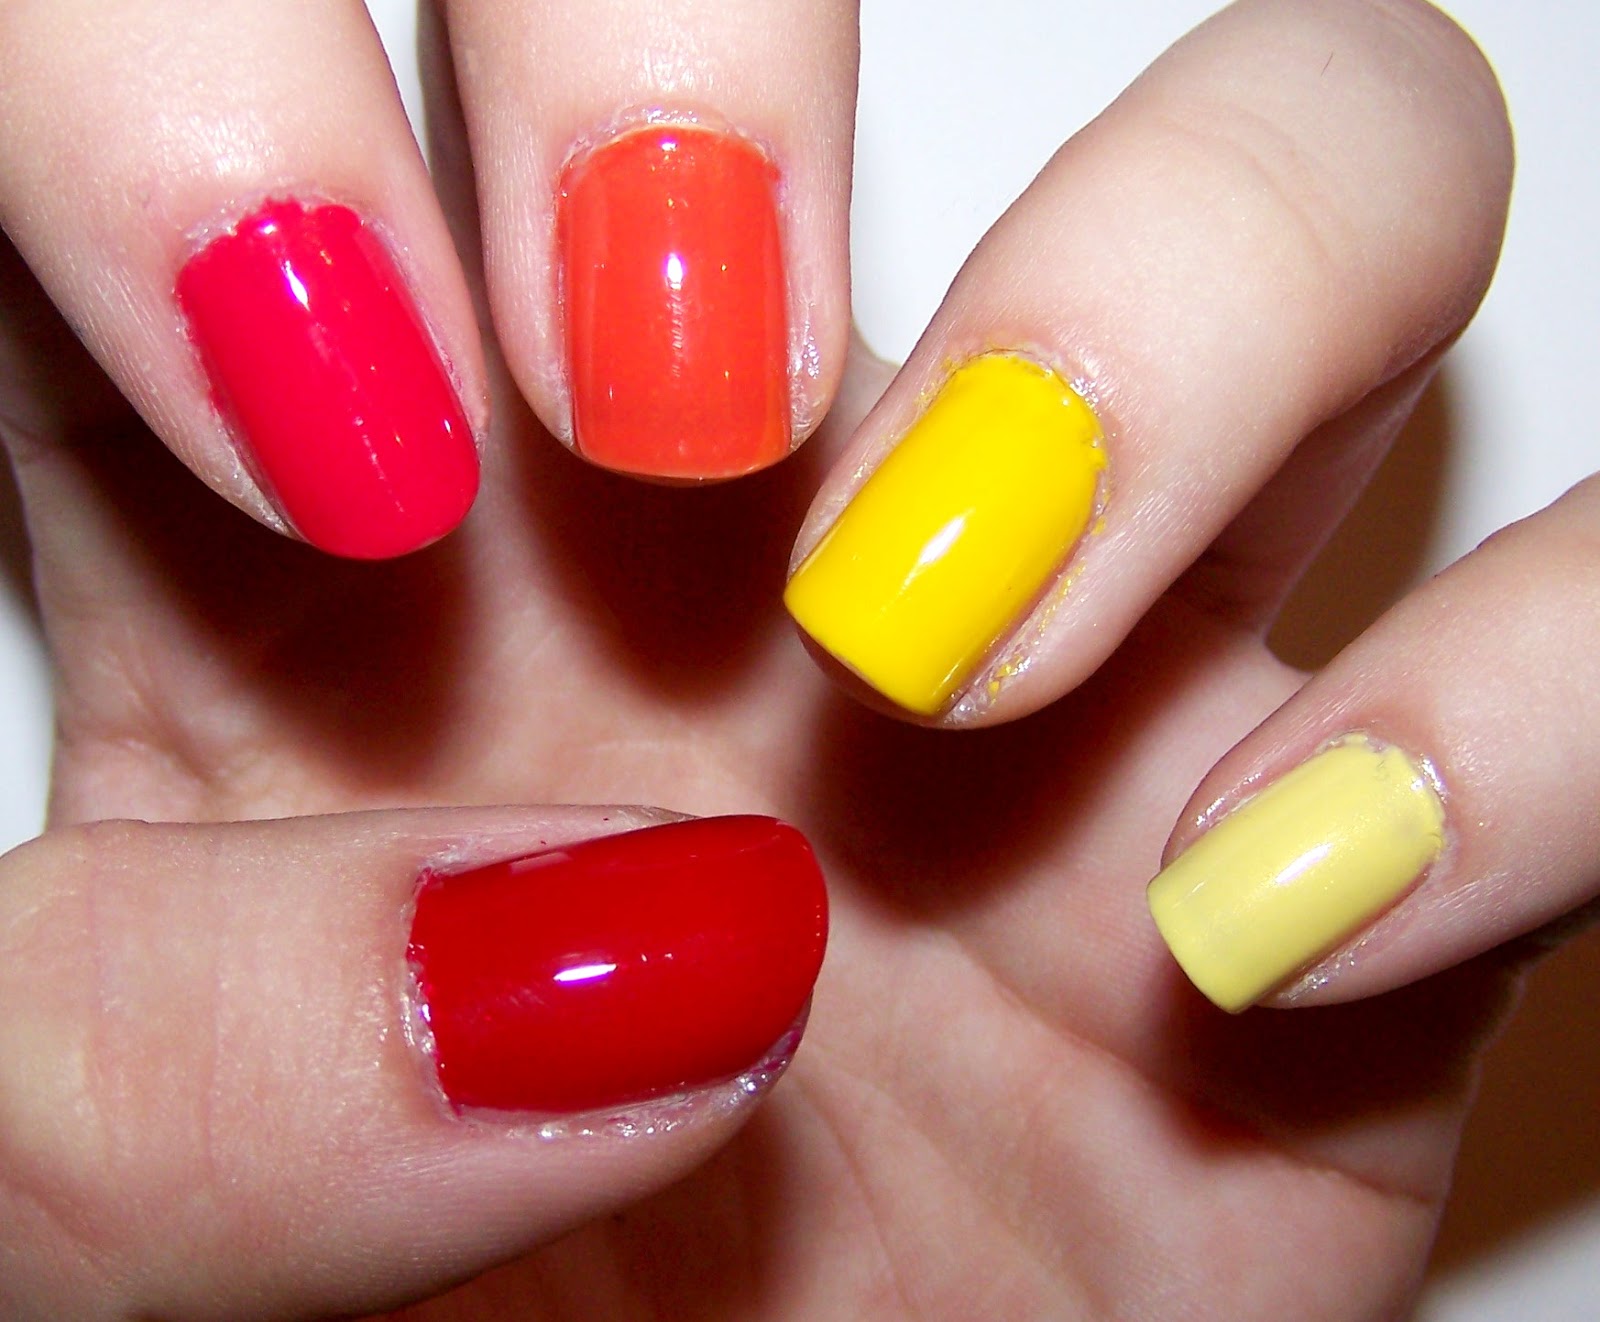 2. Trending Ombre Nail Design - wide 10